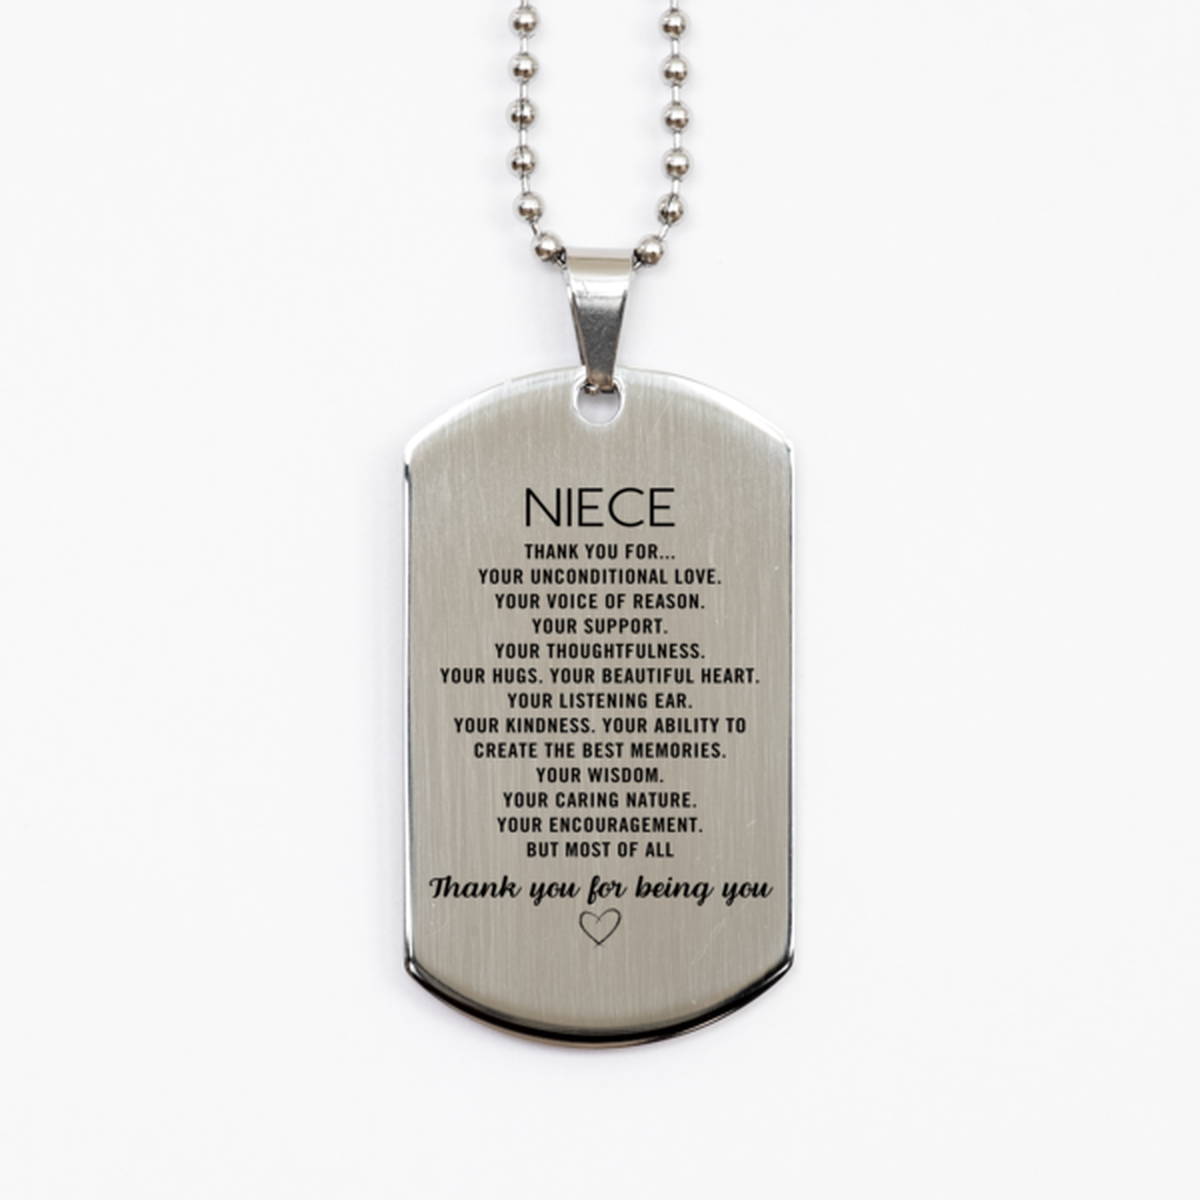 Niece Silver Dog Tag Custom, Engraved Gifts For Niece Christmas Graduation Birthday Gifts for Men Women Niece Thank you for Your unconditional love